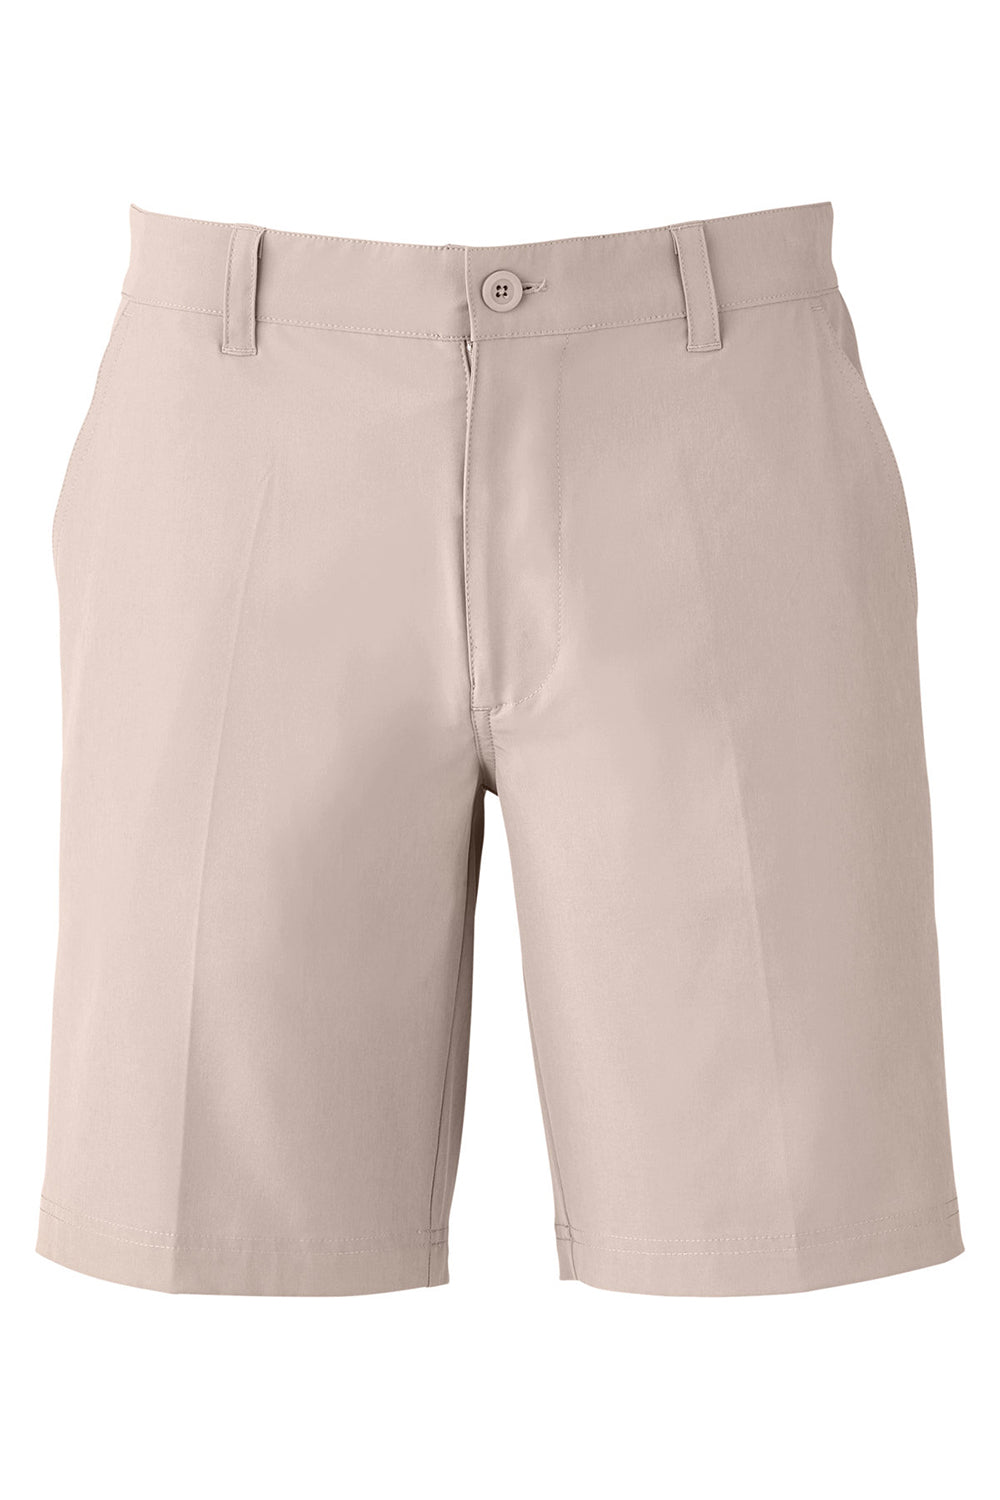 Swannies Golf SWS700 Mens Sully Shorts w/ Pockets Tan Flat Front